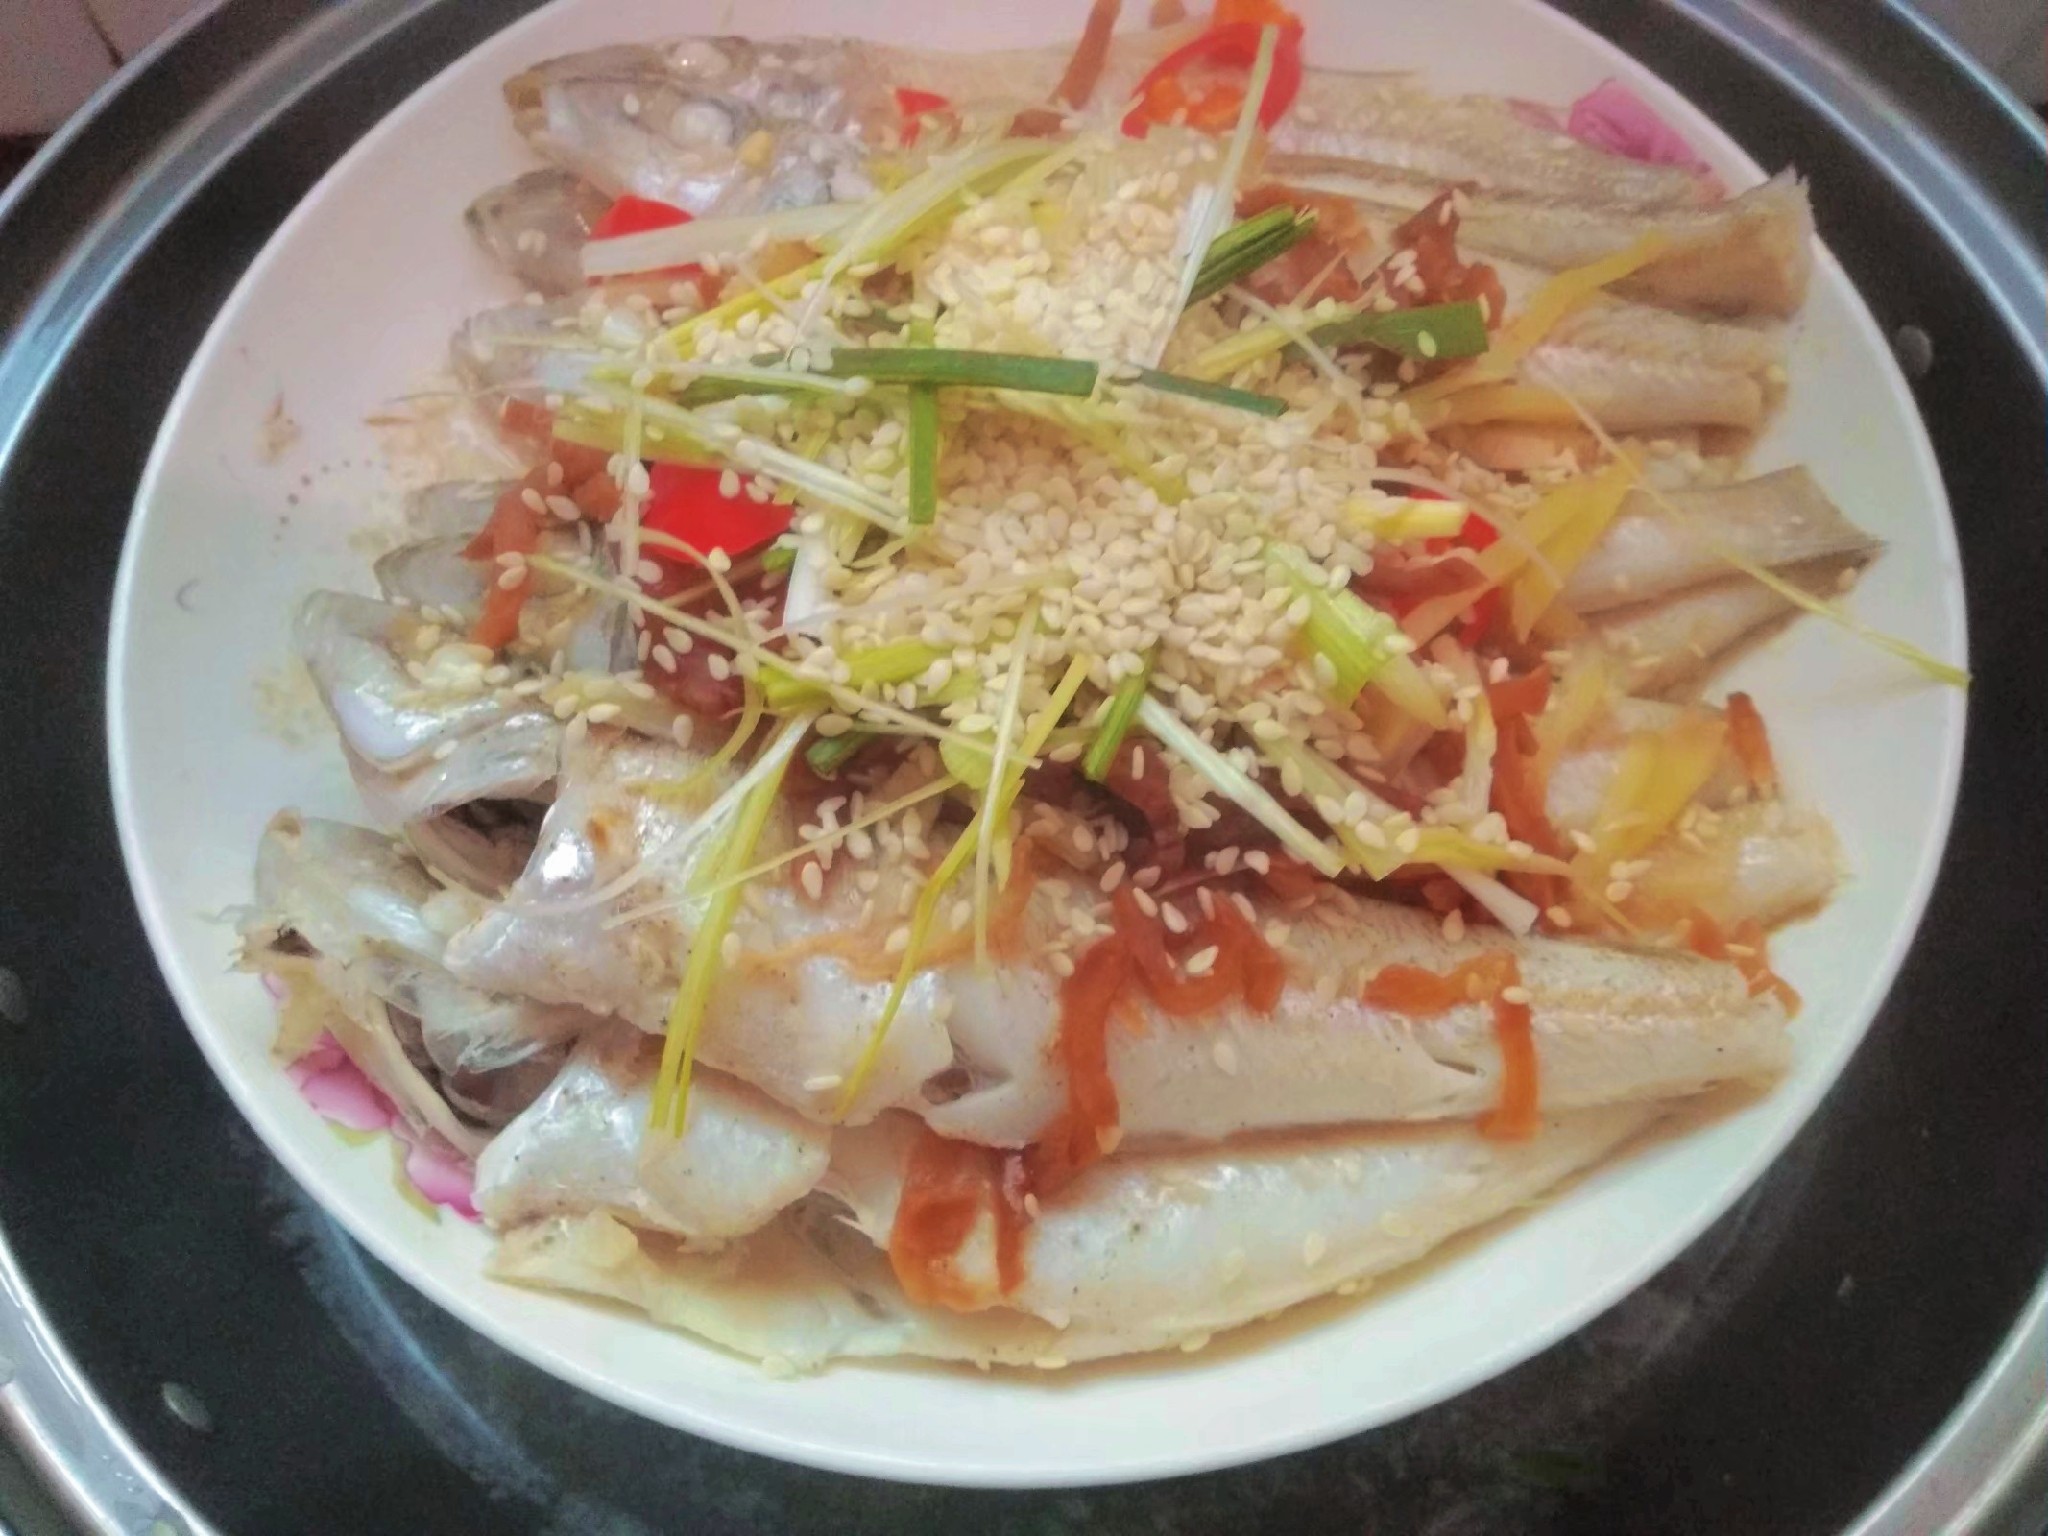 Steamed Sand Pointed Fish recipe